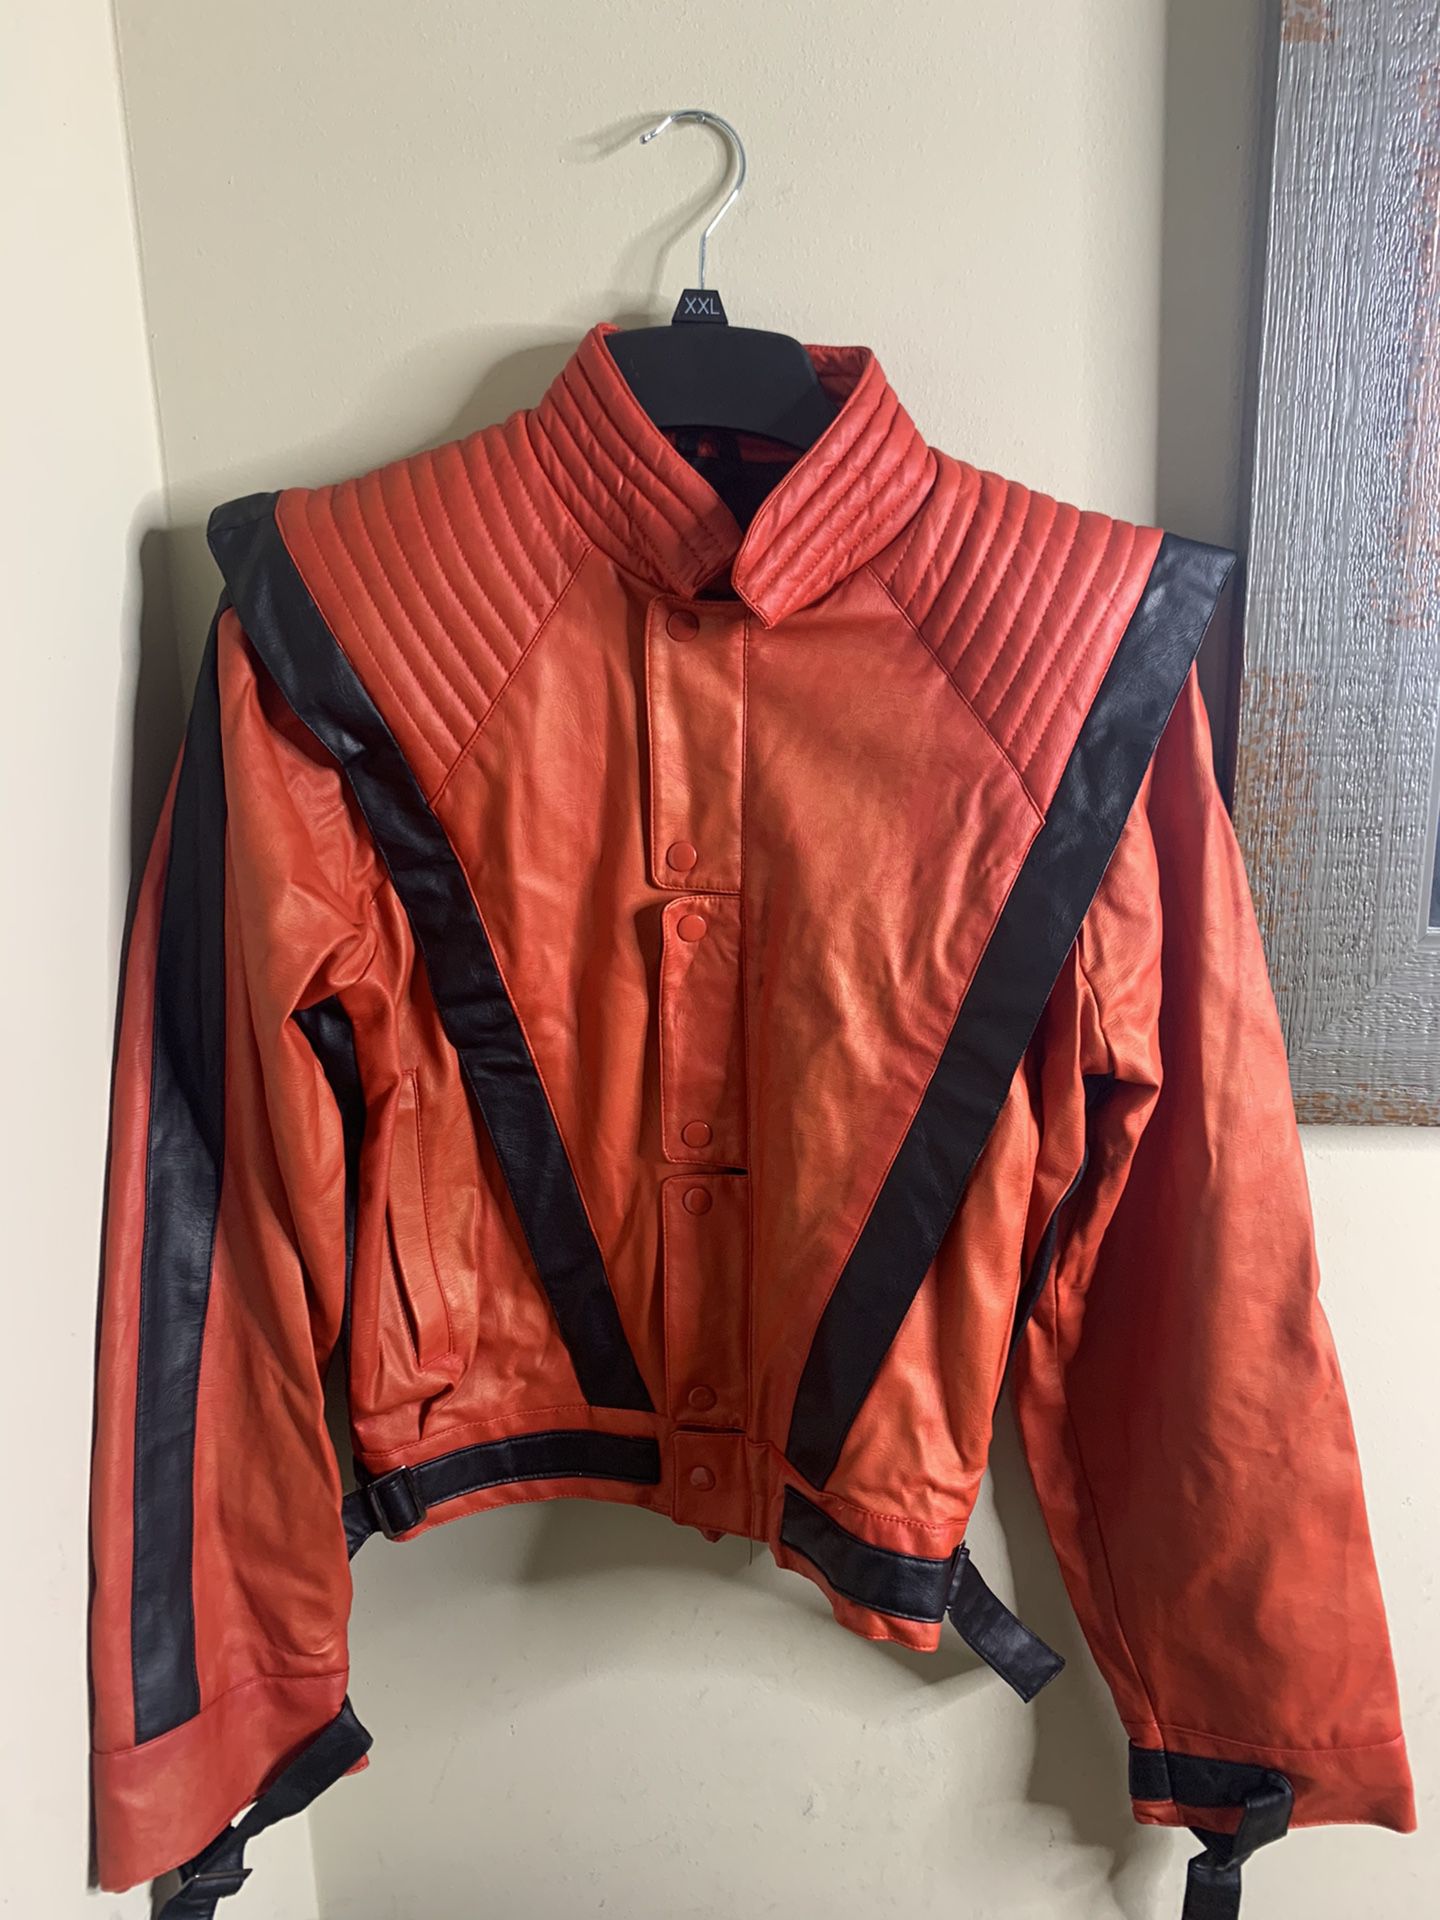 Authentic 1980s Micheal Jackson “Triller” jacket